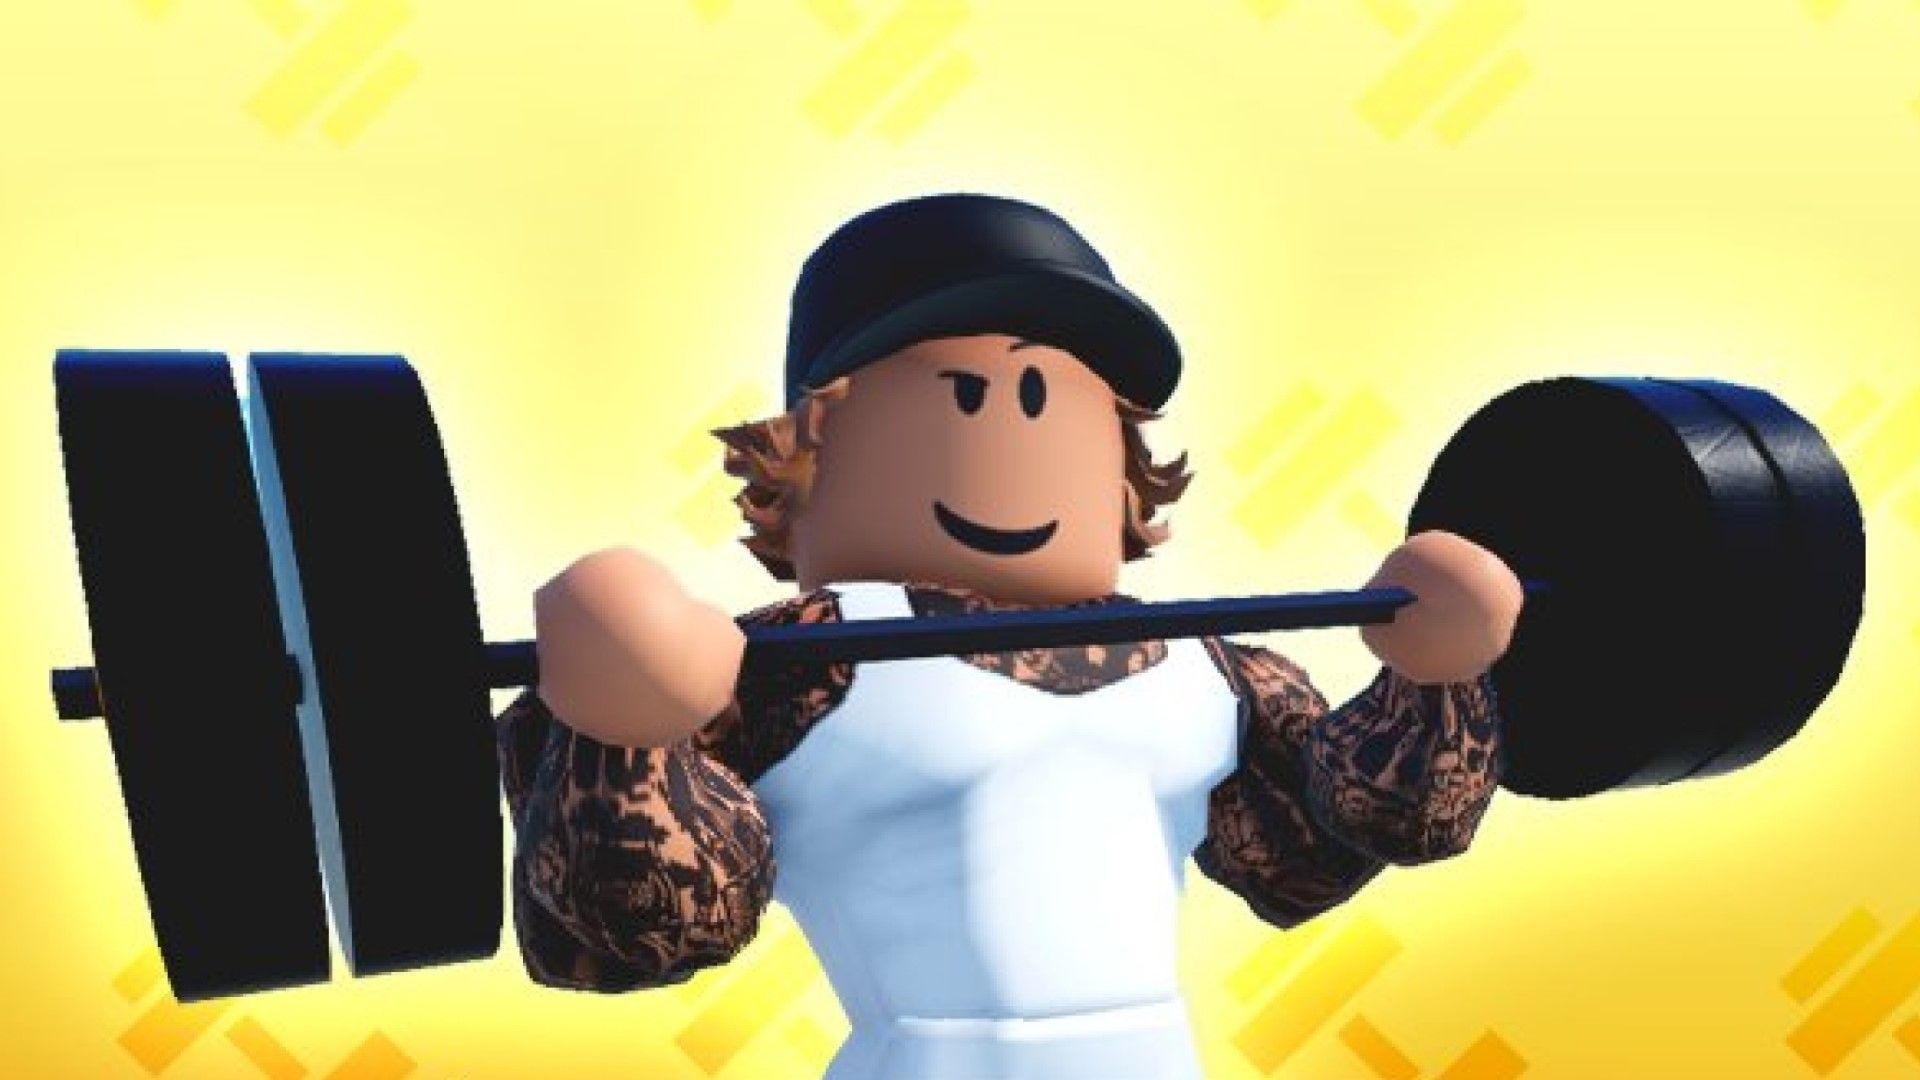 november-2021-all-working-codes-for-strongman-simulator-in-roblox-youtube